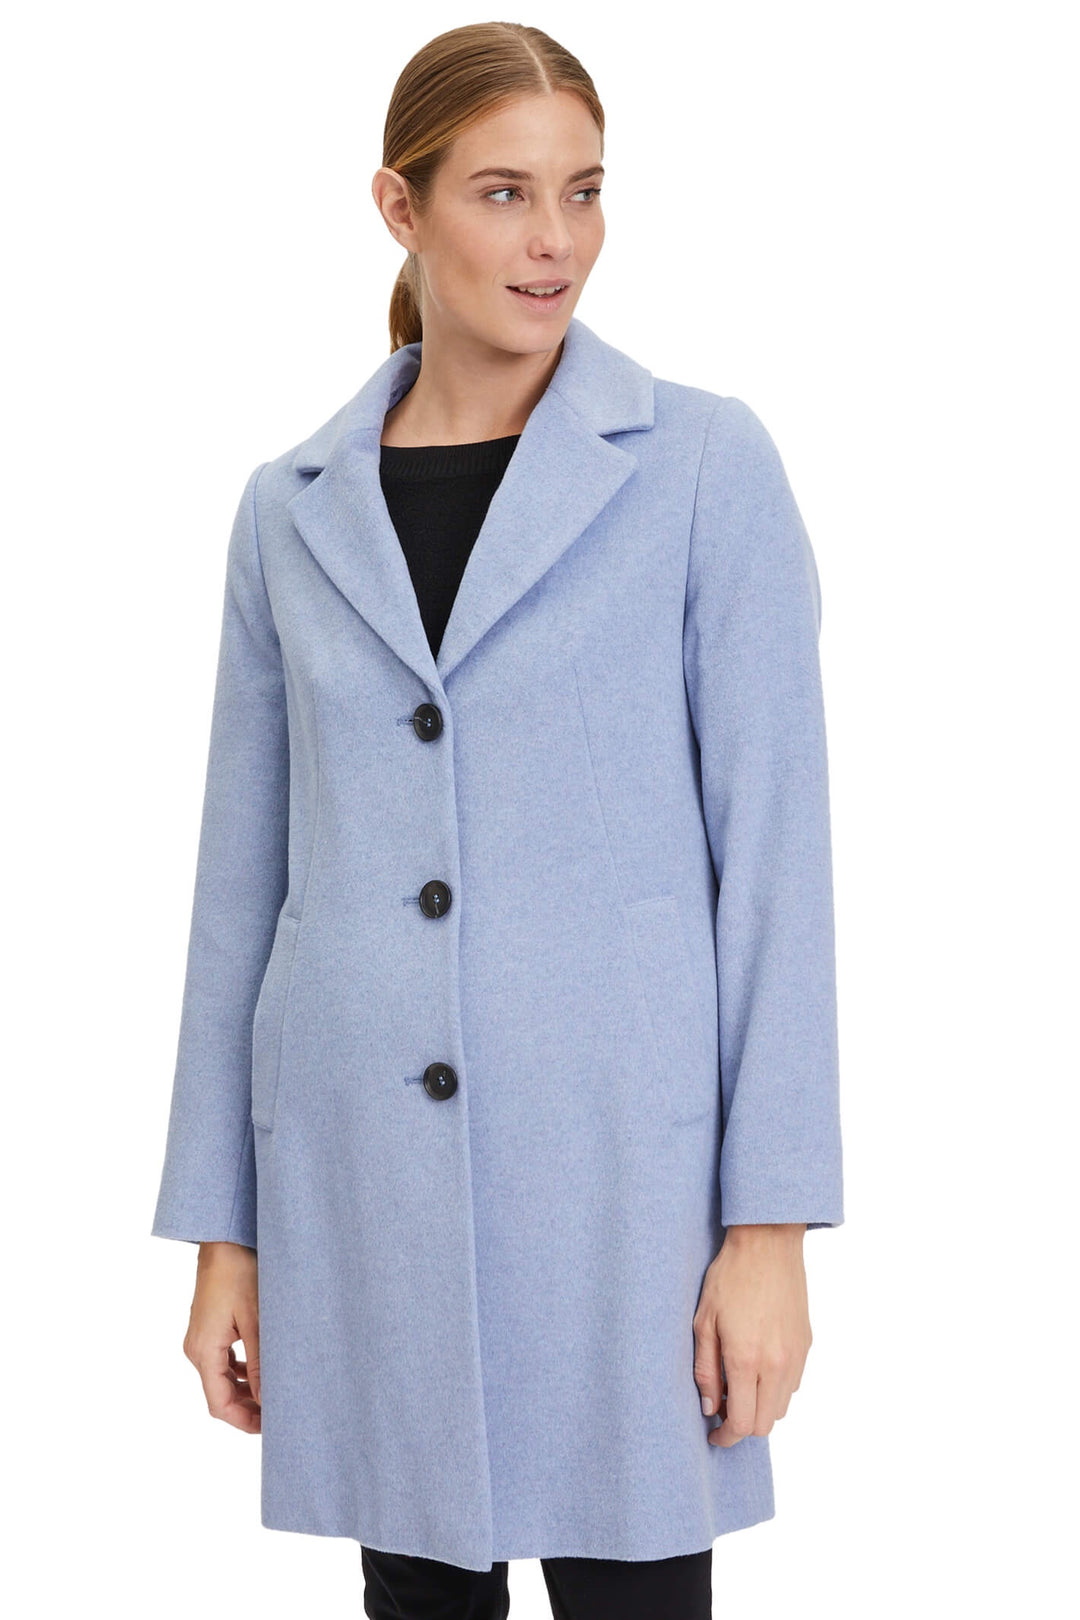 Betty Barclay 7578 2146 8002 Lavender Blue Wool Mix Three Button Coat - Dotique Chesterfield